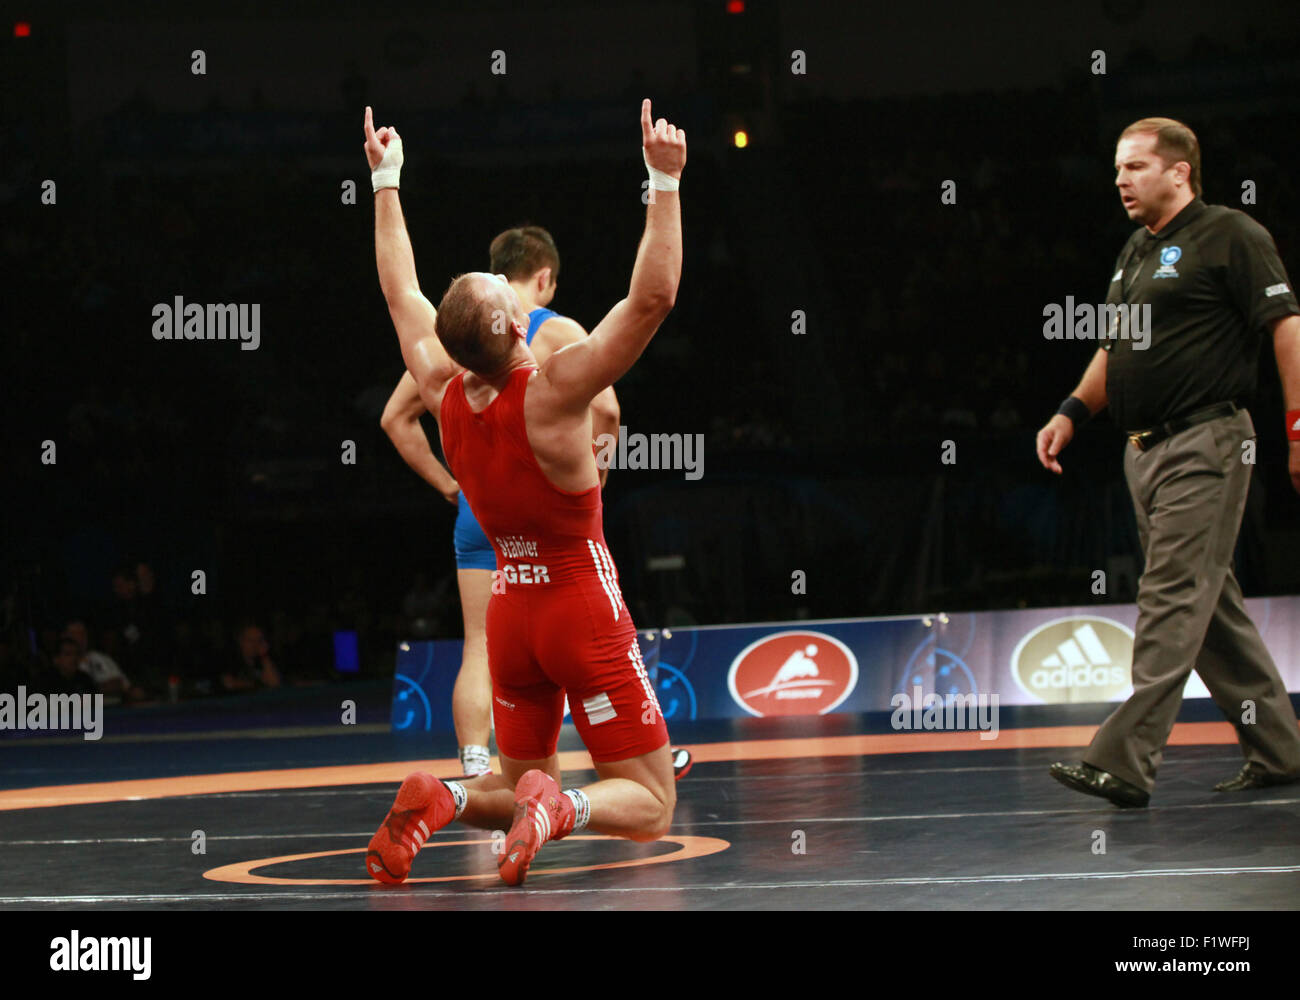 Las Vegas, Nevada, USA. 7th Sep, 2015. Germany's Frank Staebler defeats Korean Hansu Ryu to win the 66 KG weight class in Greco Roman wrestling on September 7, 2015 at the 2015 World Wrestling Championships at Orleans Arena in Las Vegas, Nevada. Credit:  Marcel Thomas/ZUMA Wire/Alamy Live News Stock Photo